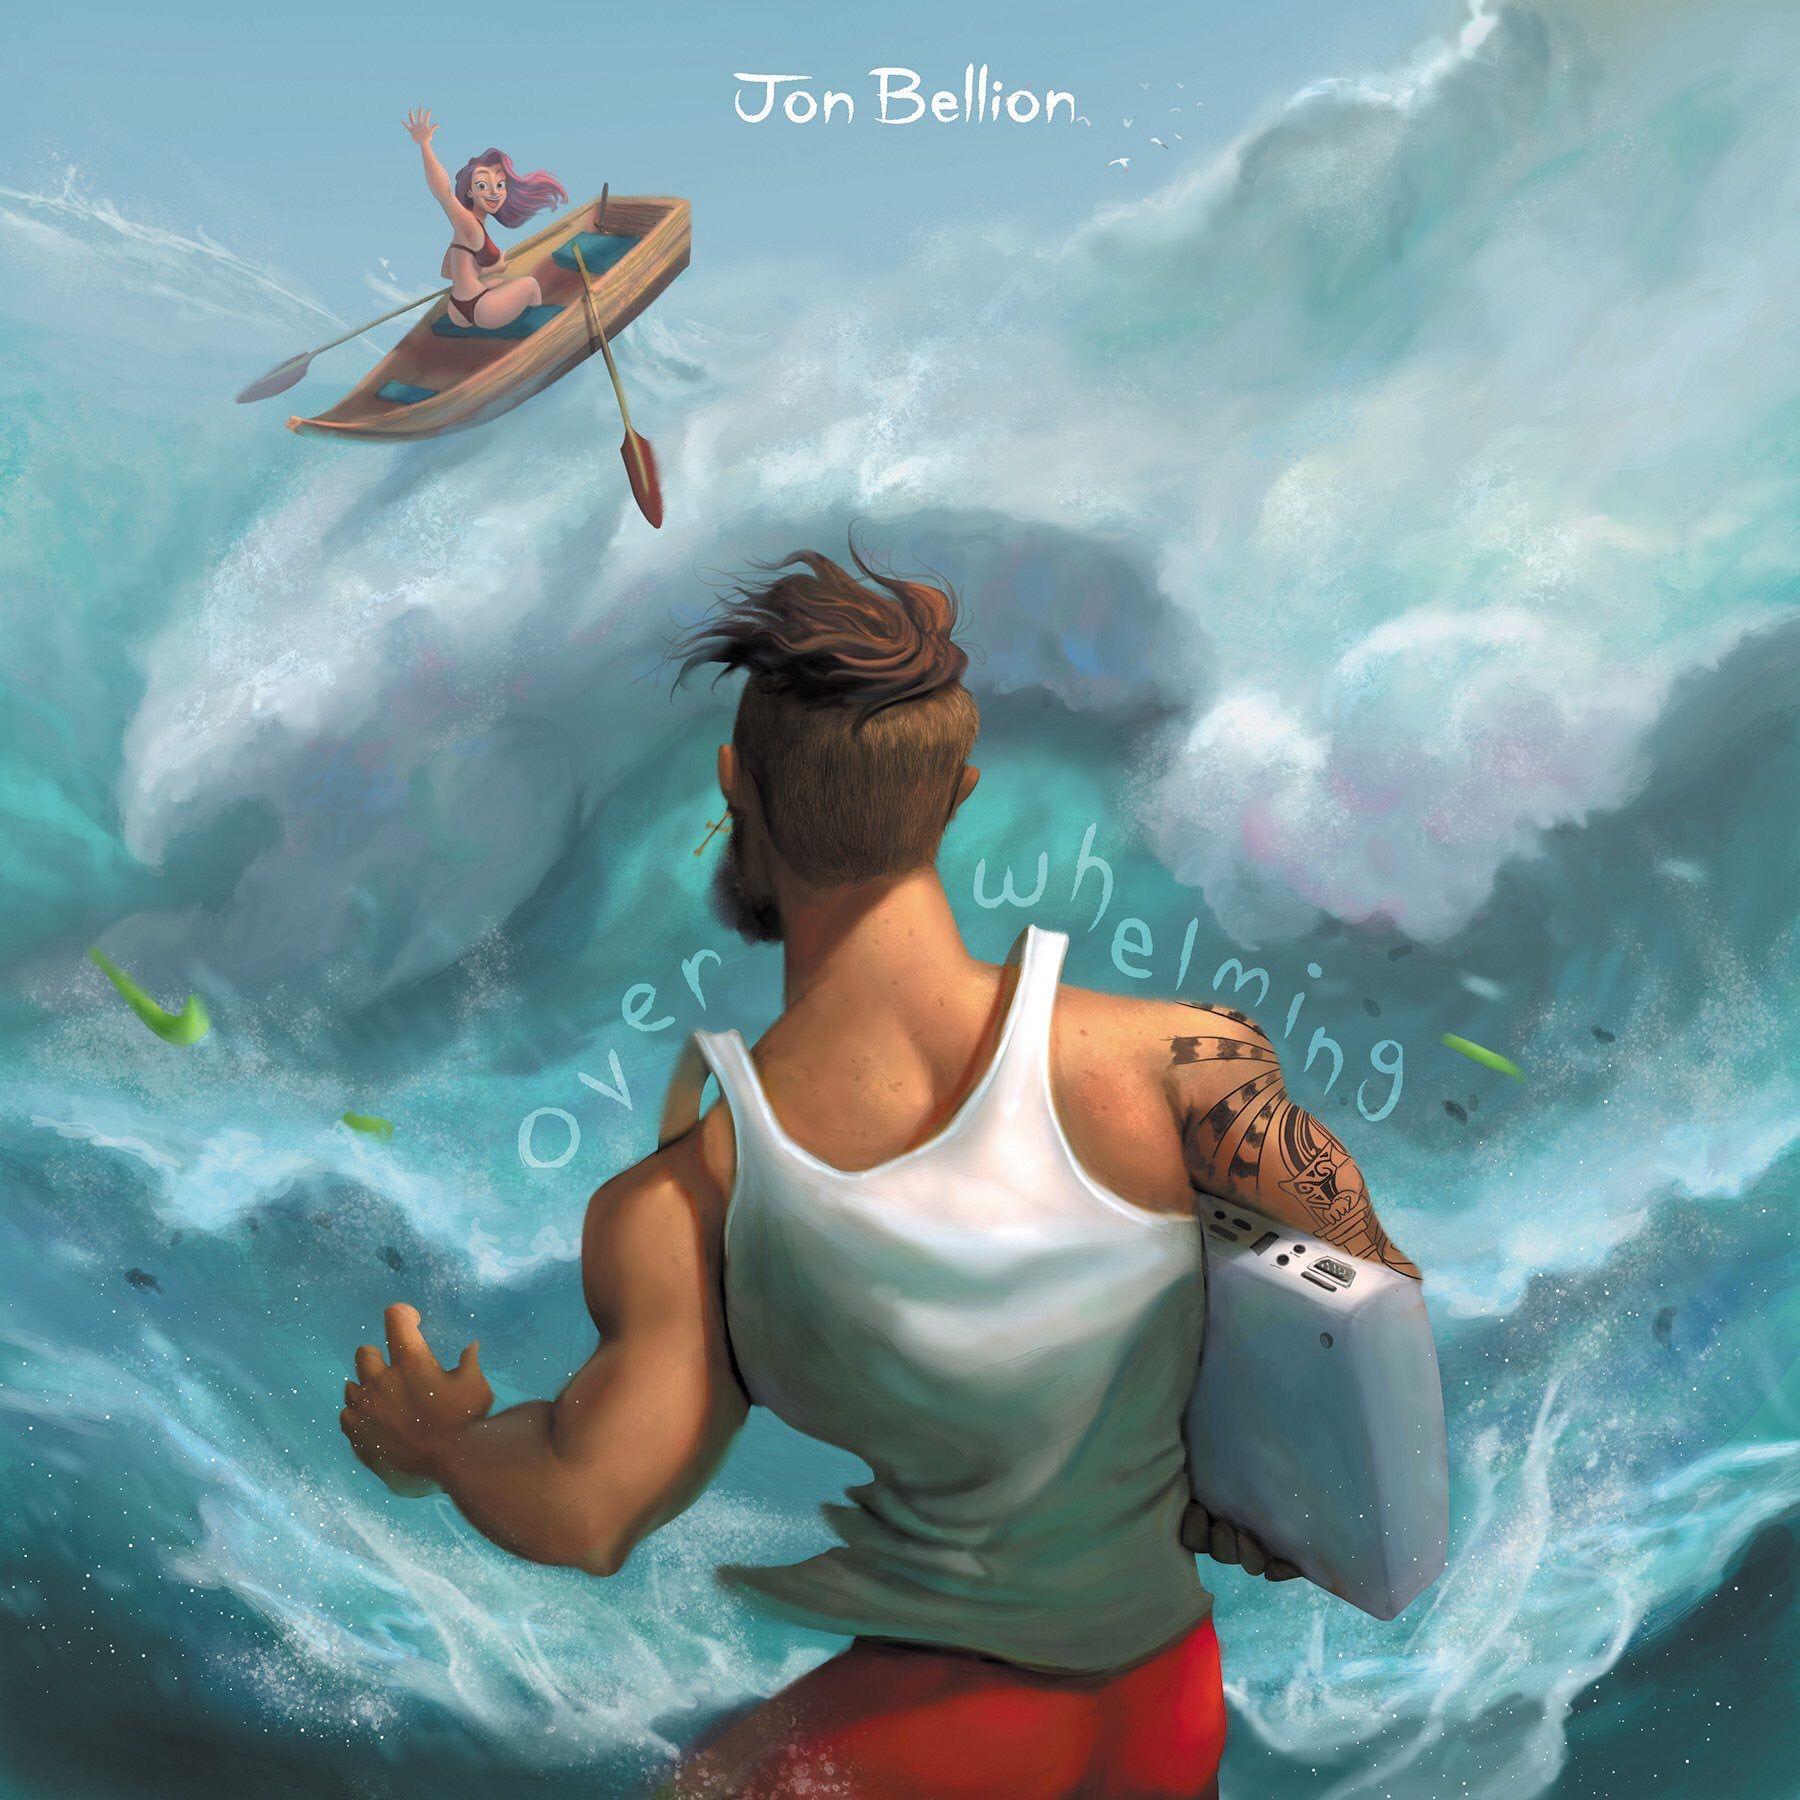 The incredible cover art from Jon Bellion's new album The Human